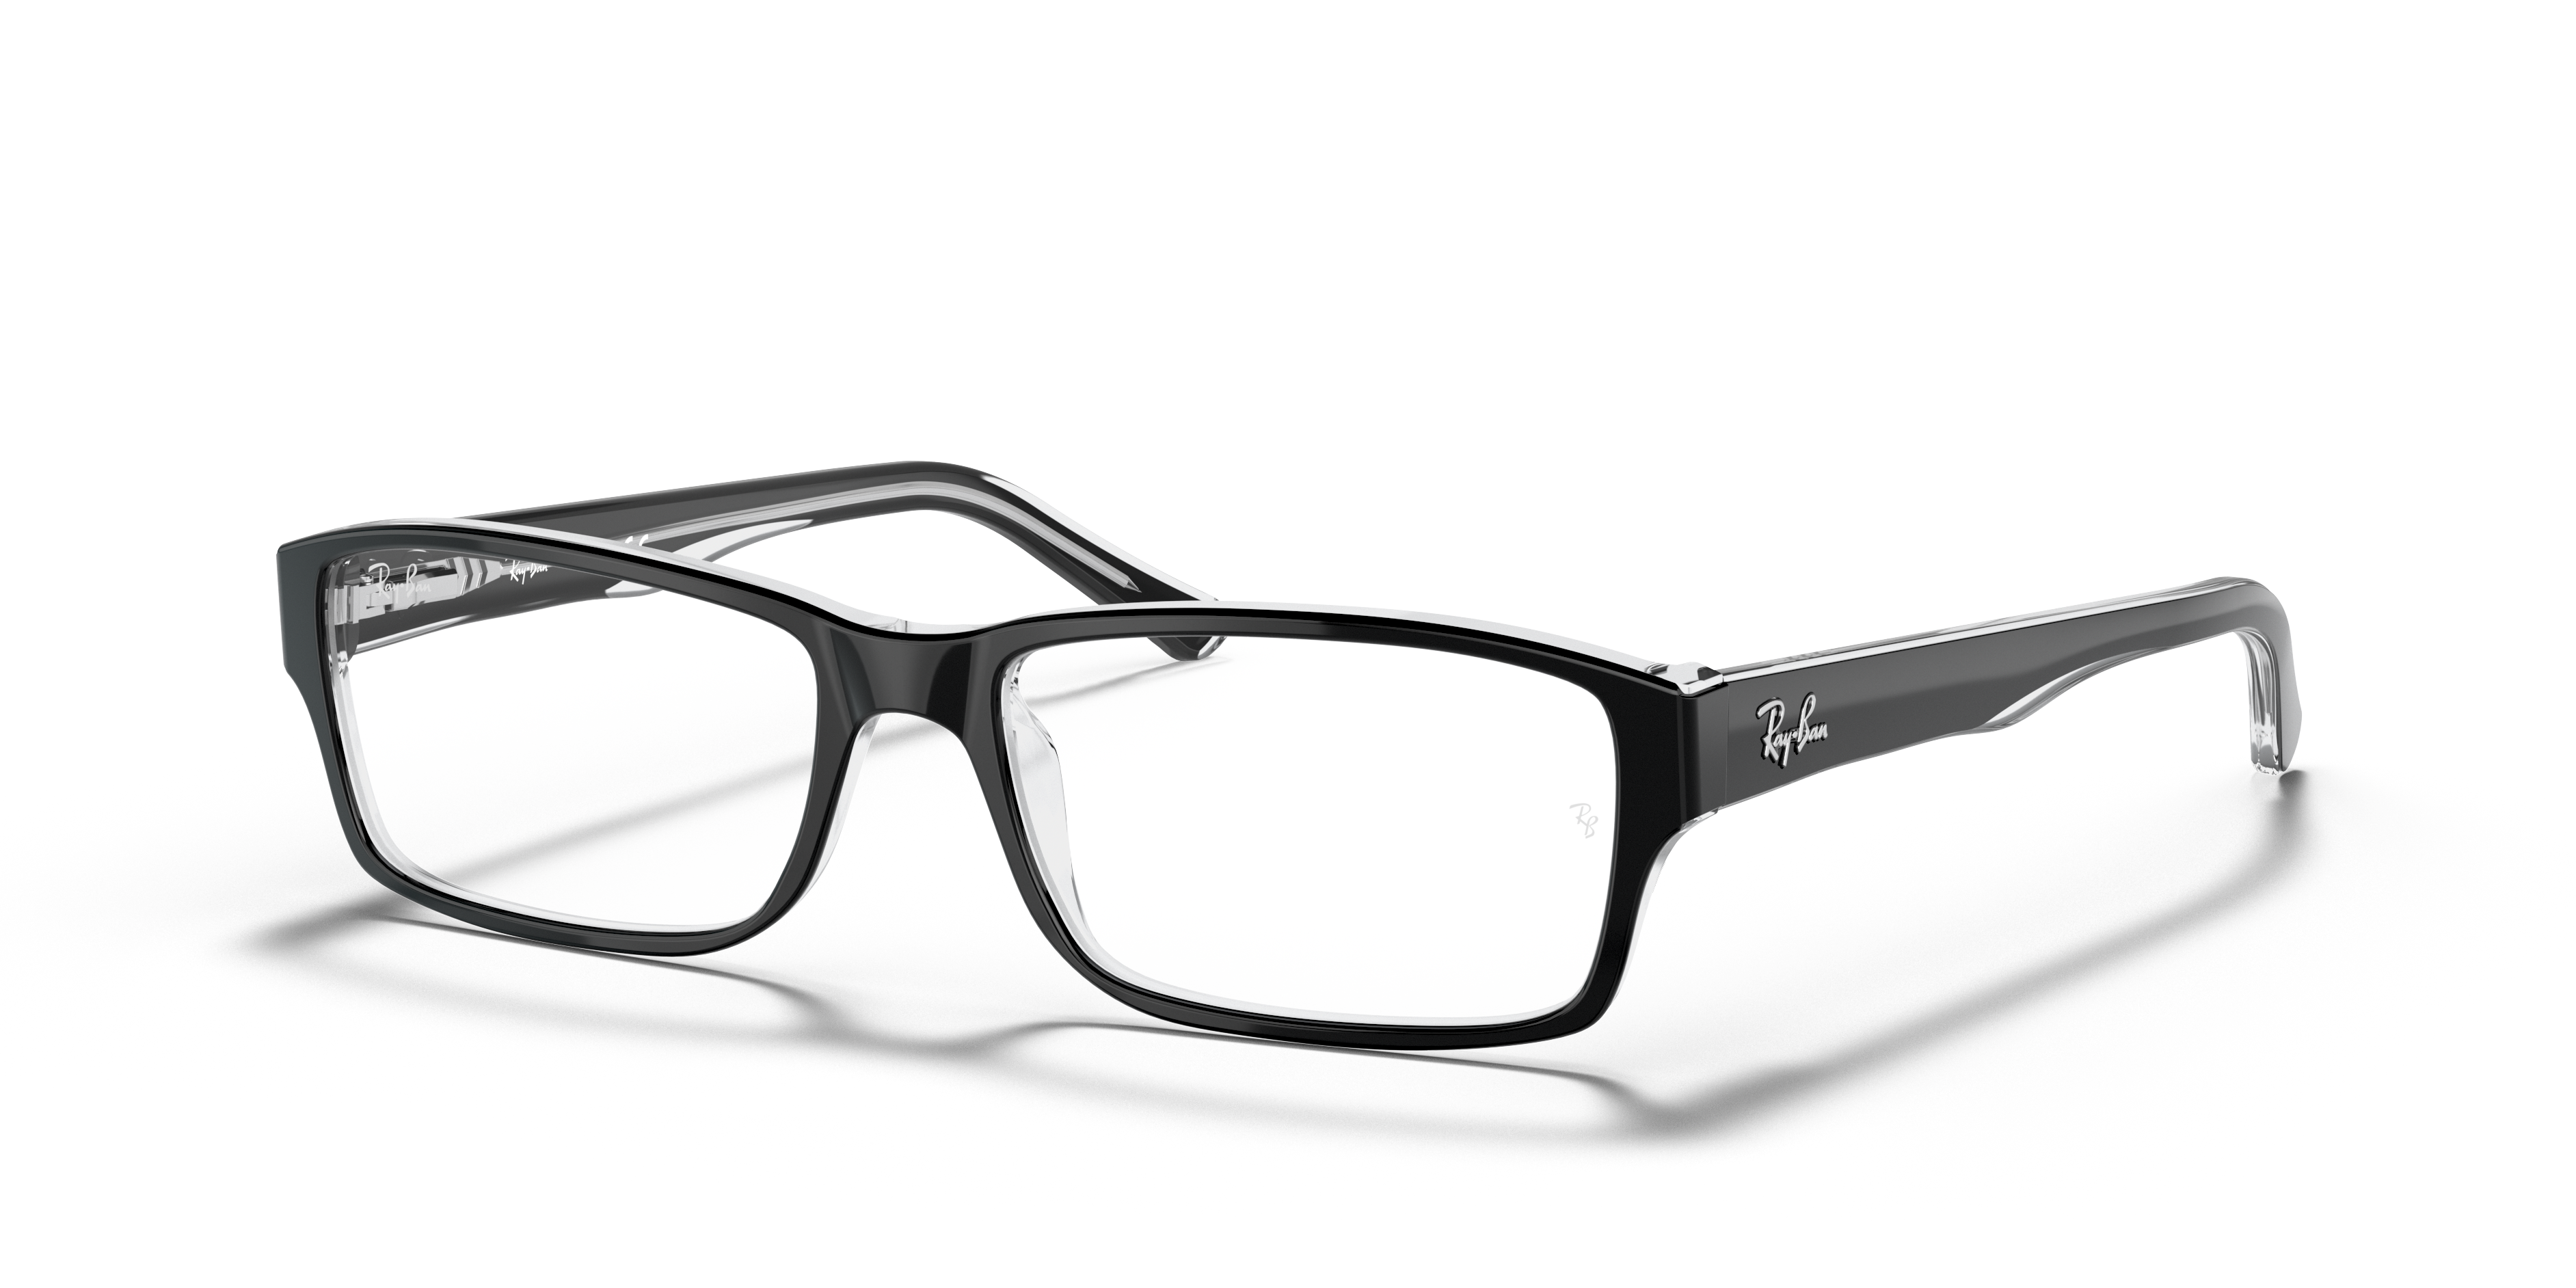 Ray-Ban Unisex Rx5169 Black On Transparent Size: Extra Small